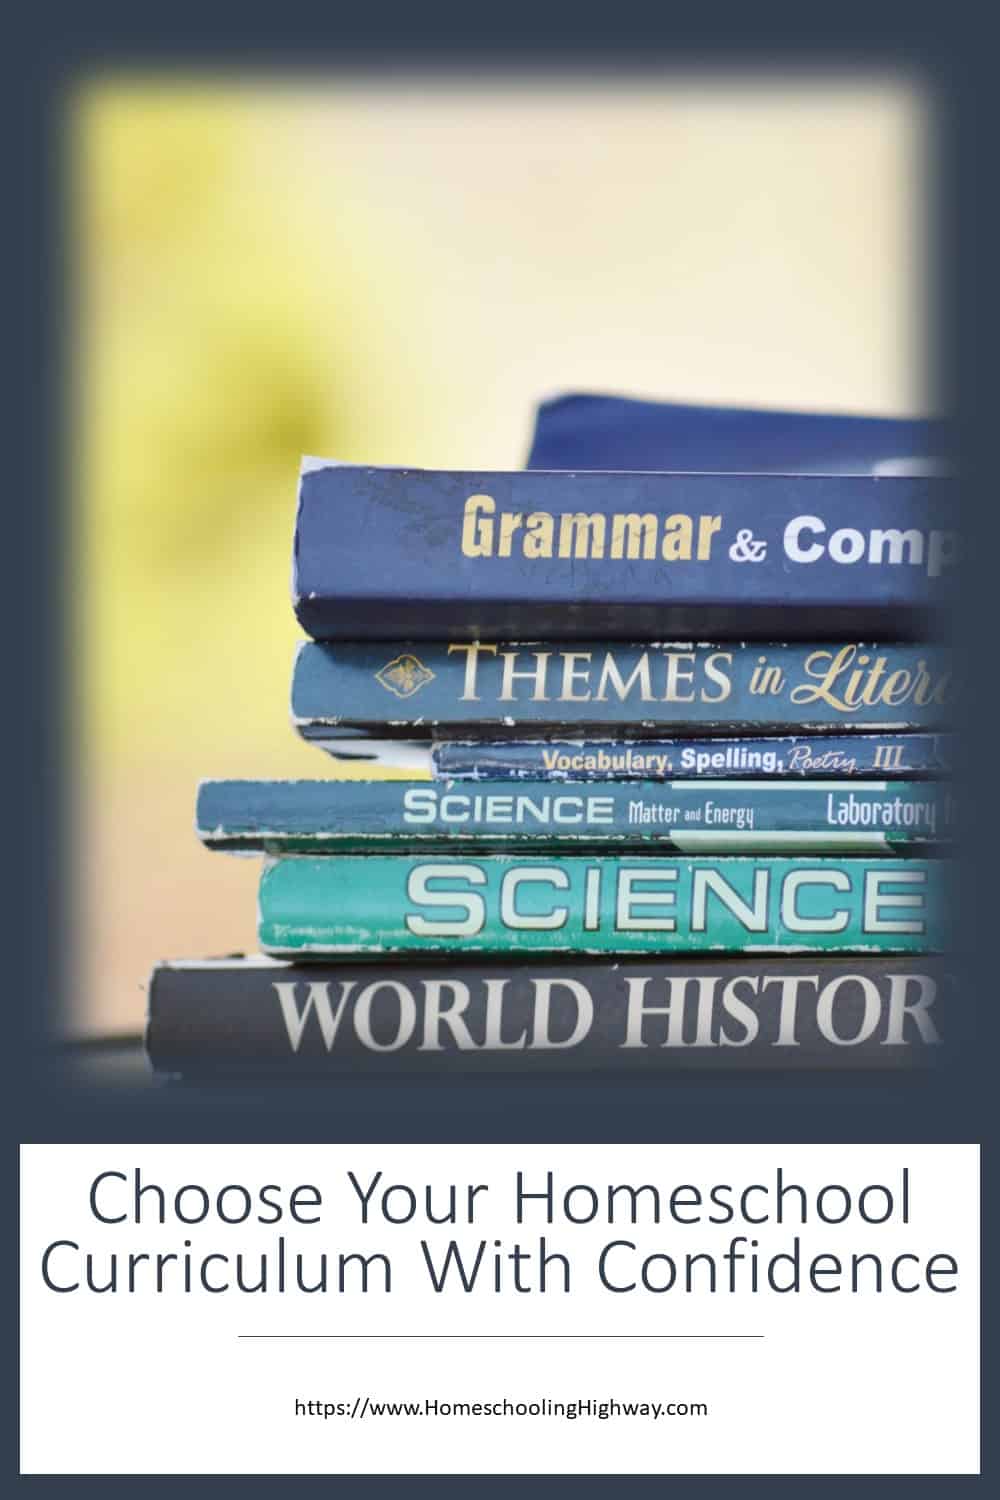 A stack of schoolbooks with text that says Choose Your Homeschool Curriculum with Confidence